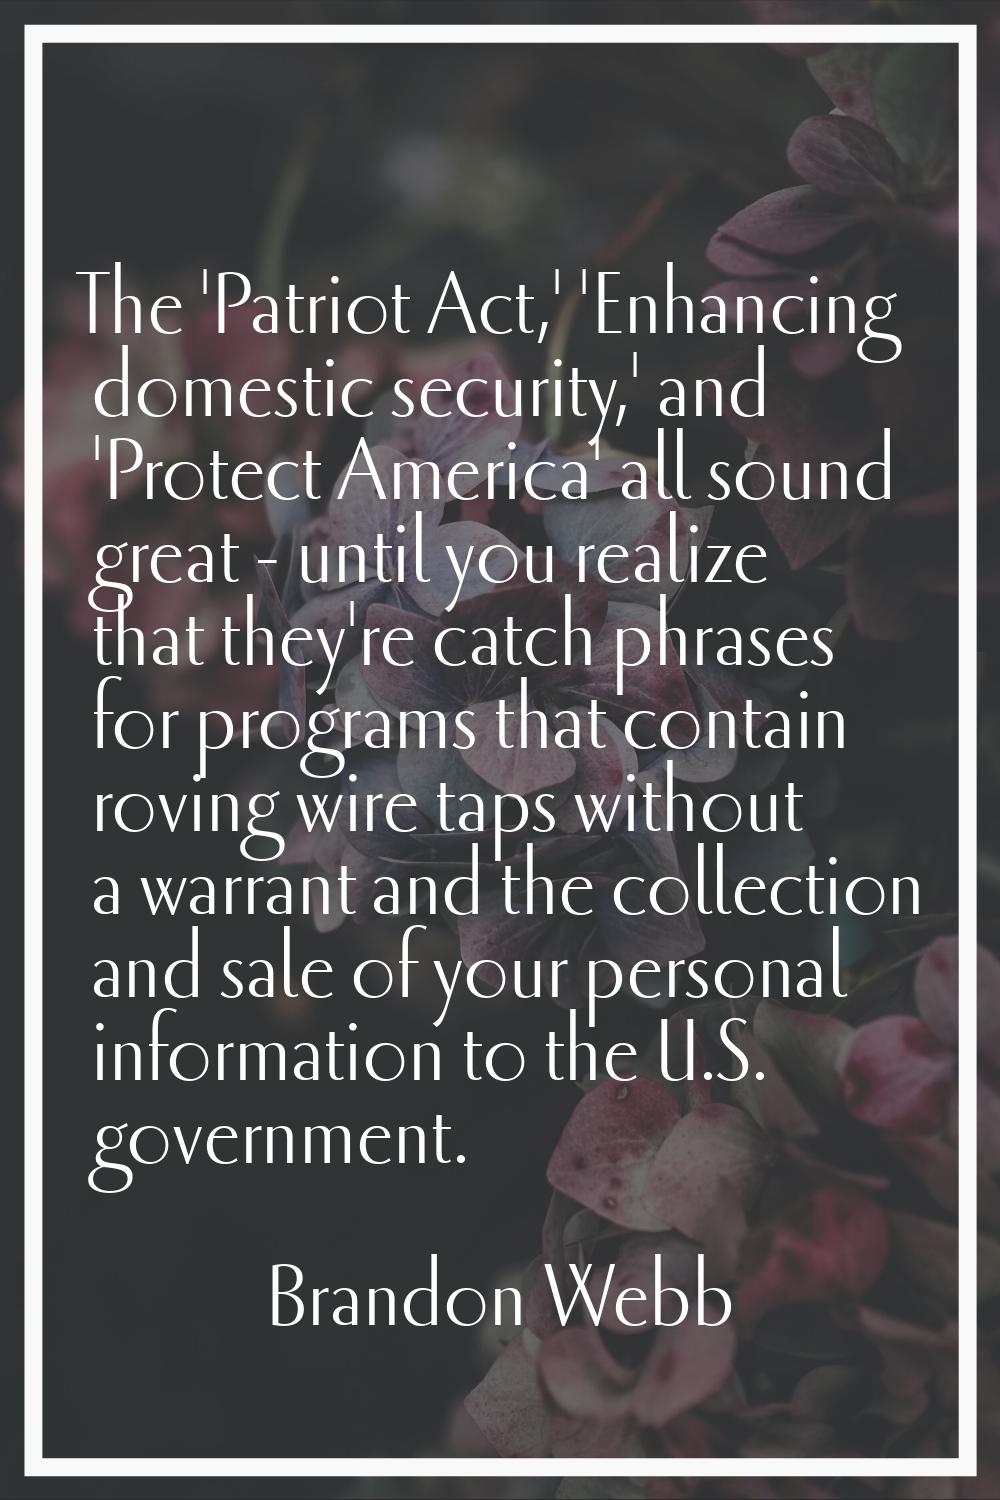 The 'Patriot Act,' 'Enhancing domestic security,' and 'Protect America' all sound great - until you